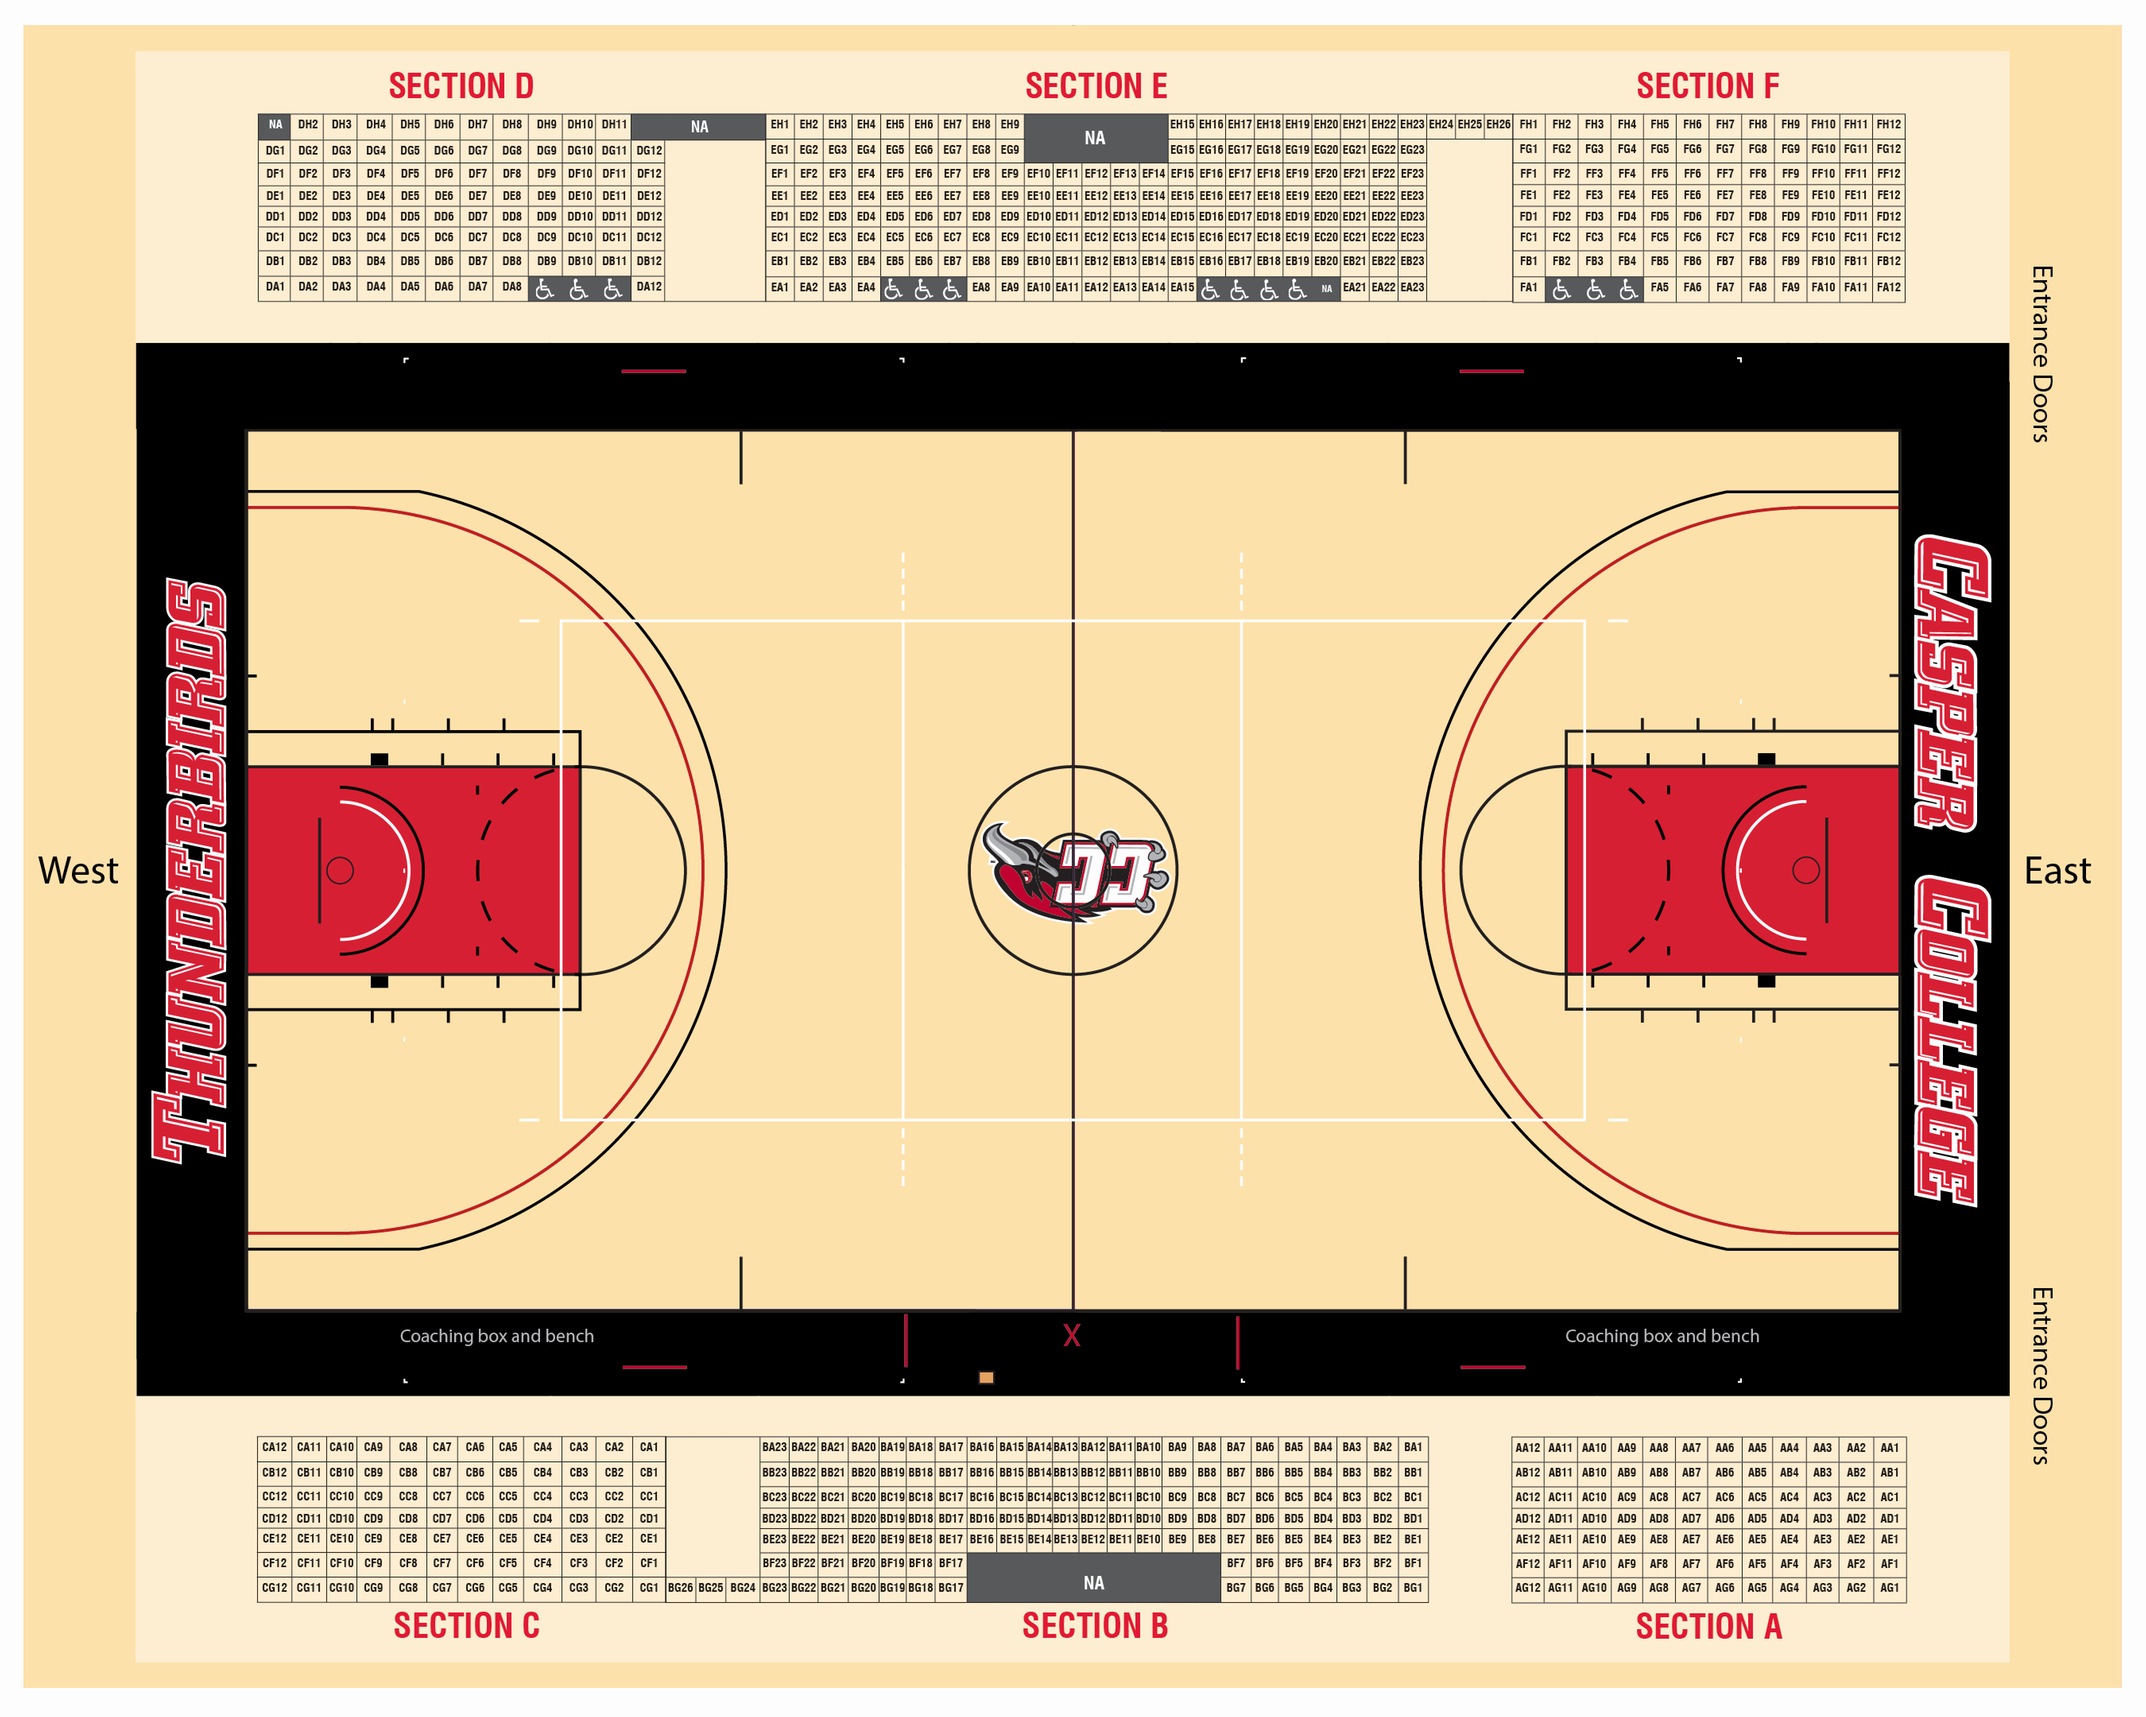 Image showing seating in the gym.